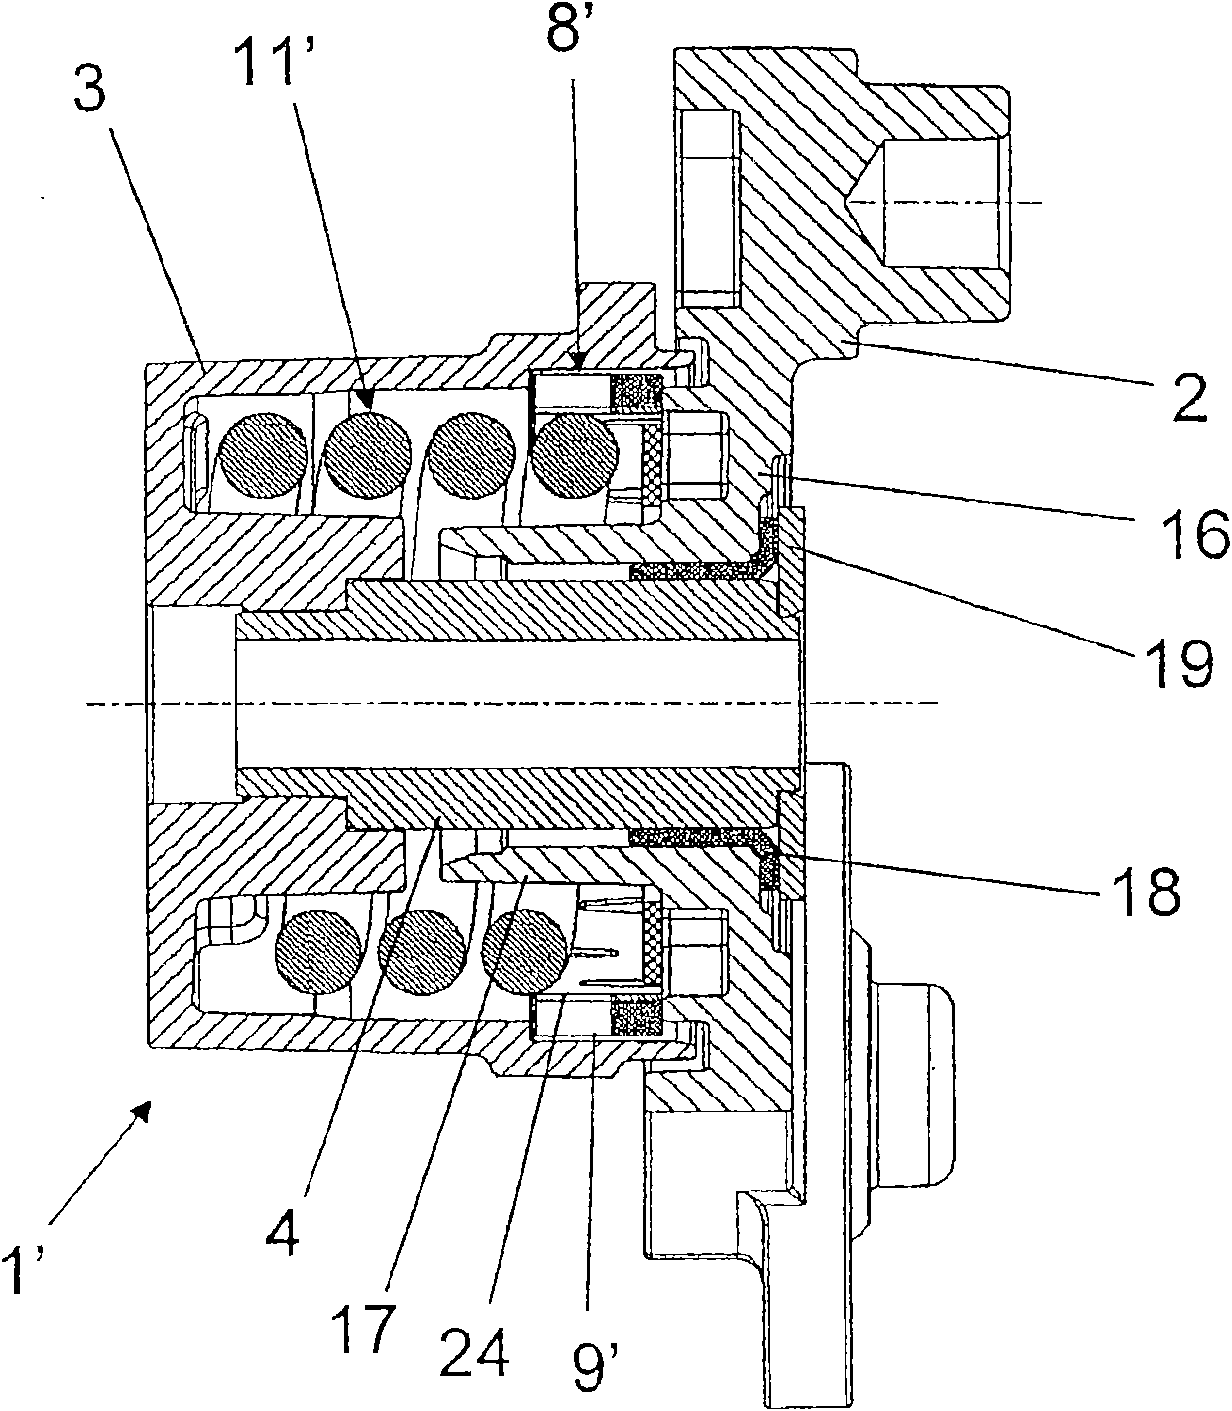 Damping device of a mechanical tensioning system for a traction mechanism drive